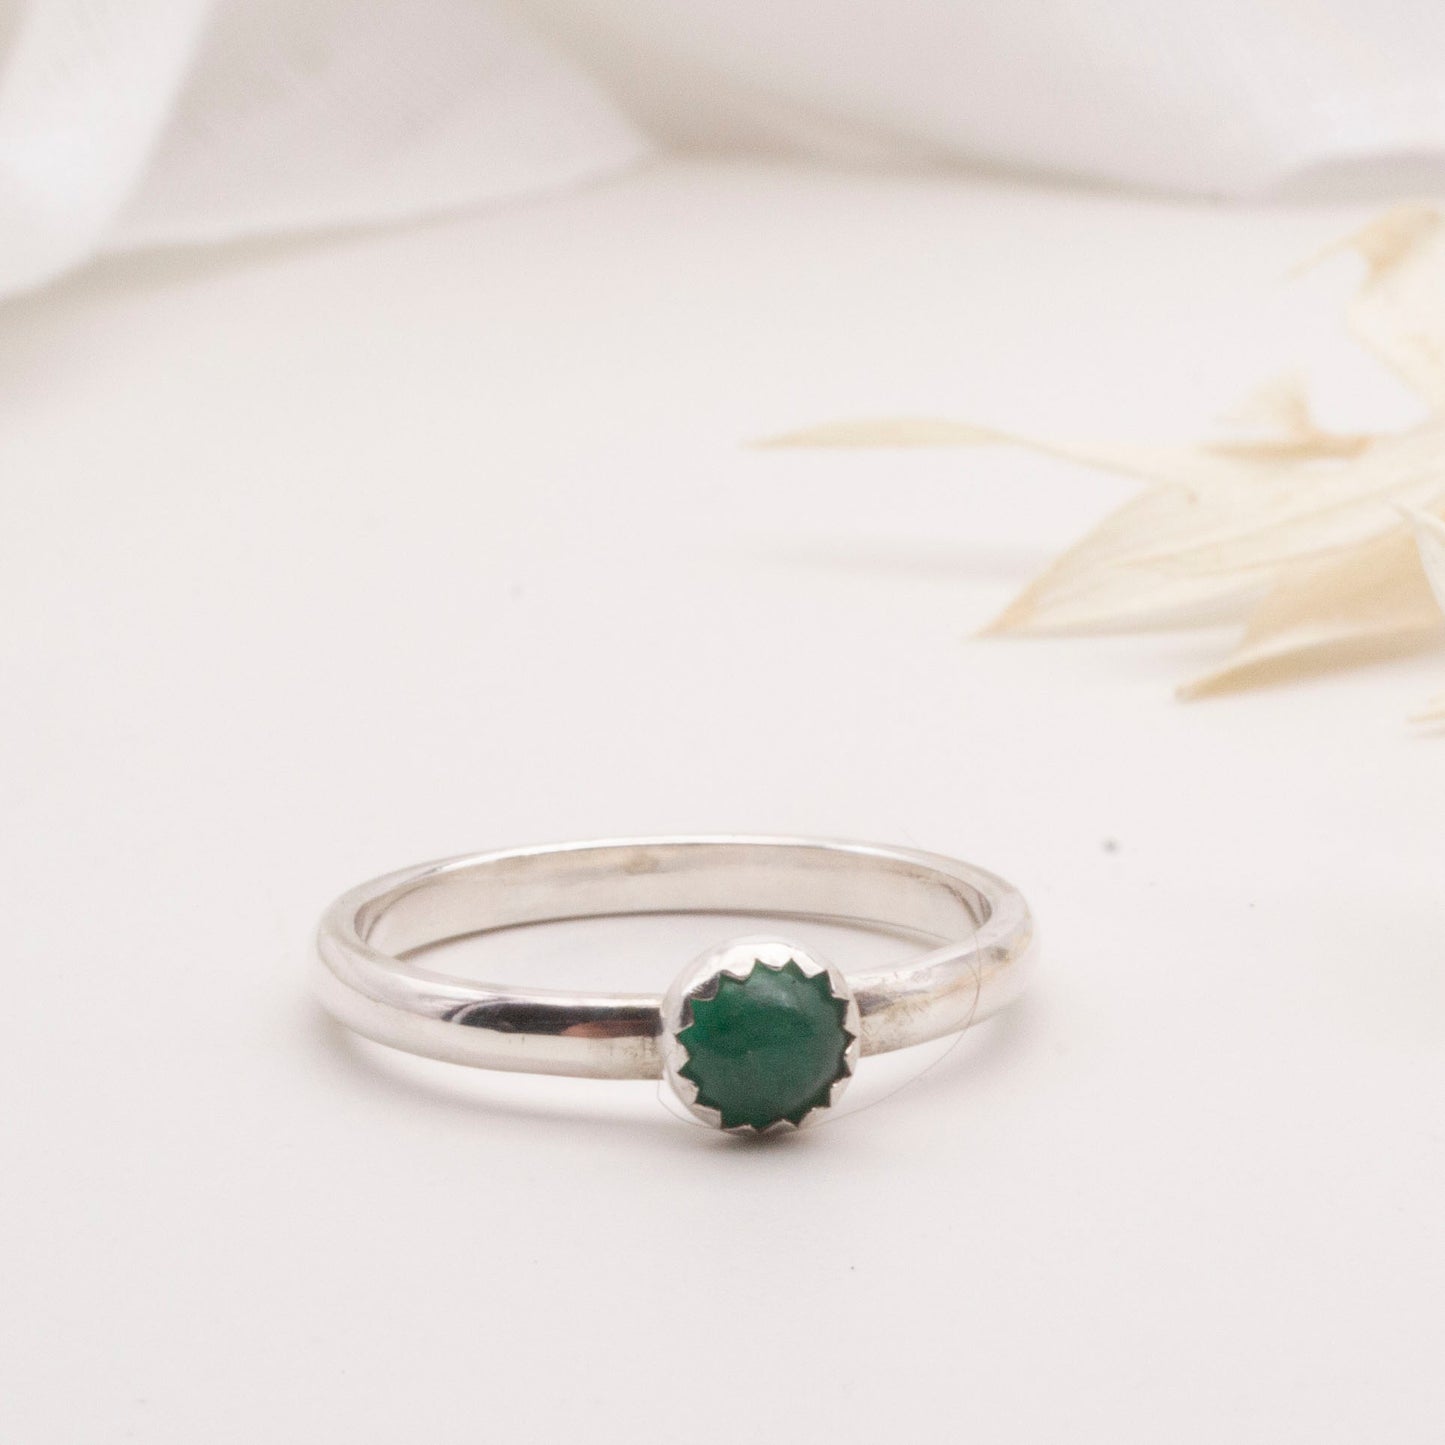 Emerald cabochon ring in size P